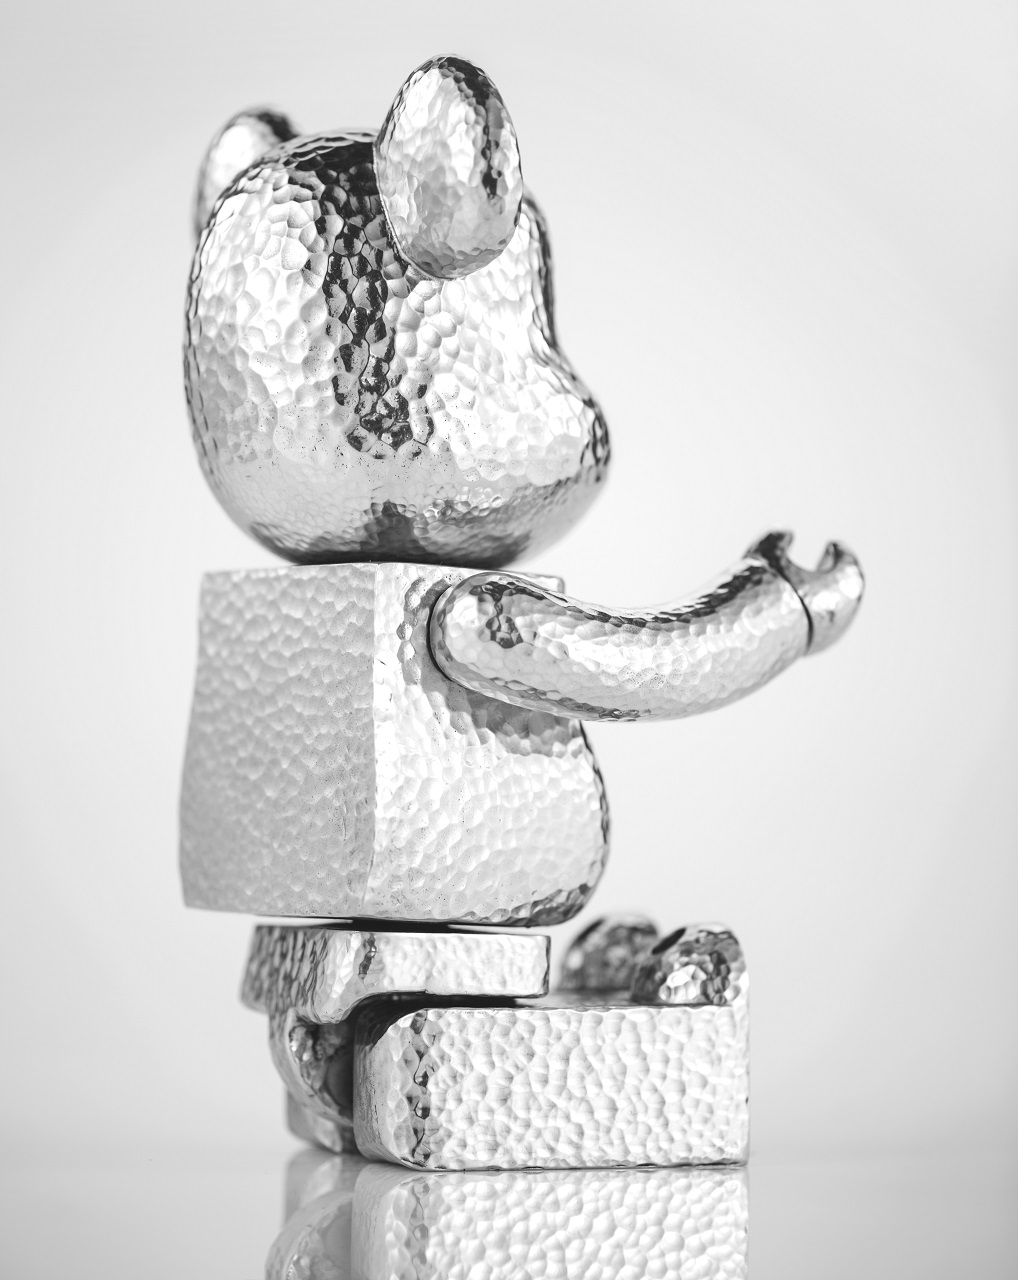 BE@RBRICK Collectors, You Have To Add This Special Edition BE@RBRICK From Royal Selangor To Your Collection-Pamper.my